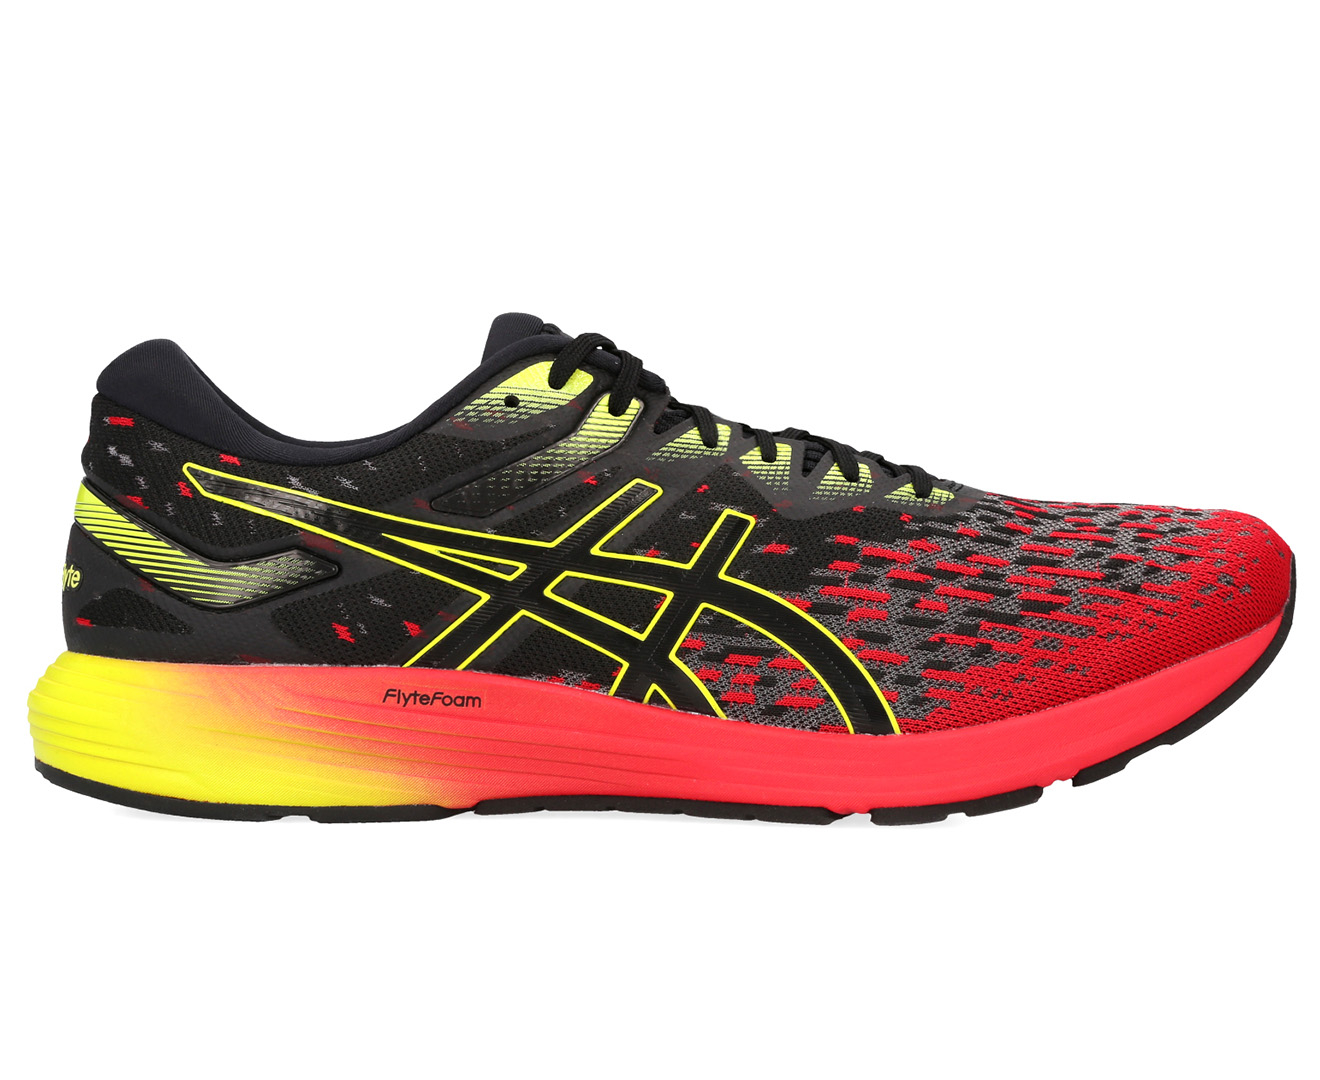 ASICS Men's DynaFlyte 4 Running Shoes - Red/Black/Yellow | Catch.co.nz